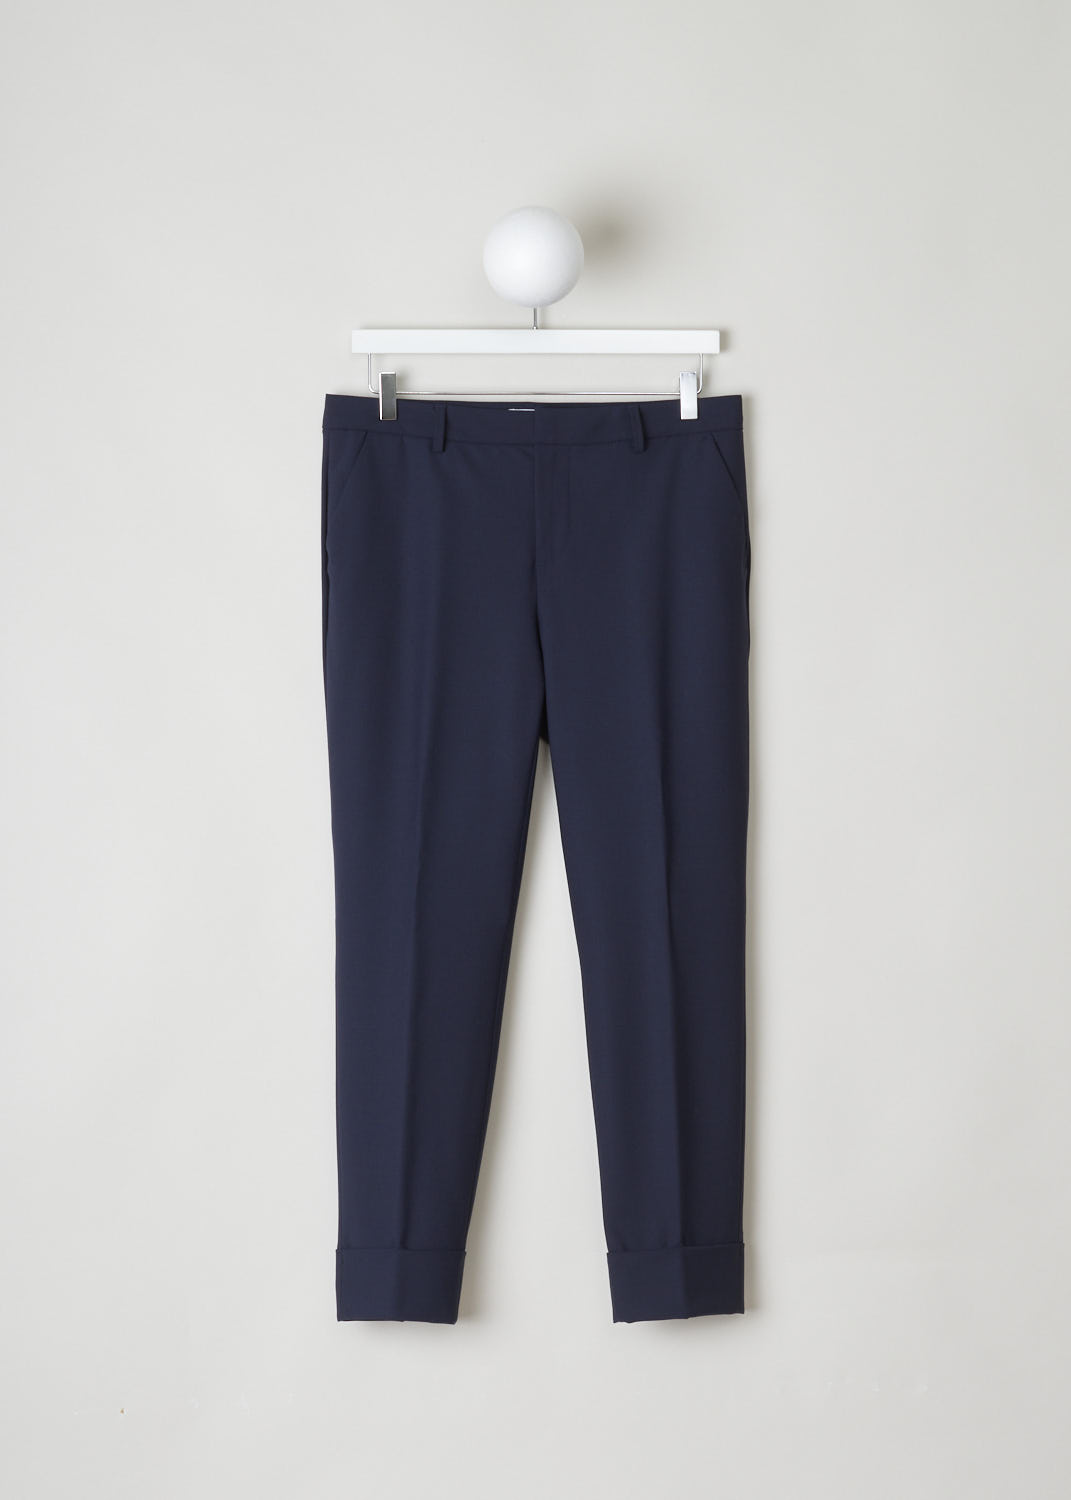 CLOSED, NAVY BLUE TROUSERS, STEWART_C91796_5H3_22_568, Blue, Front, Made in the classic trouser model, featuring forward slanted pockets on the front and two welt pockets in the back. What makes this model stand out above the rest is the broad fold-over hem.
